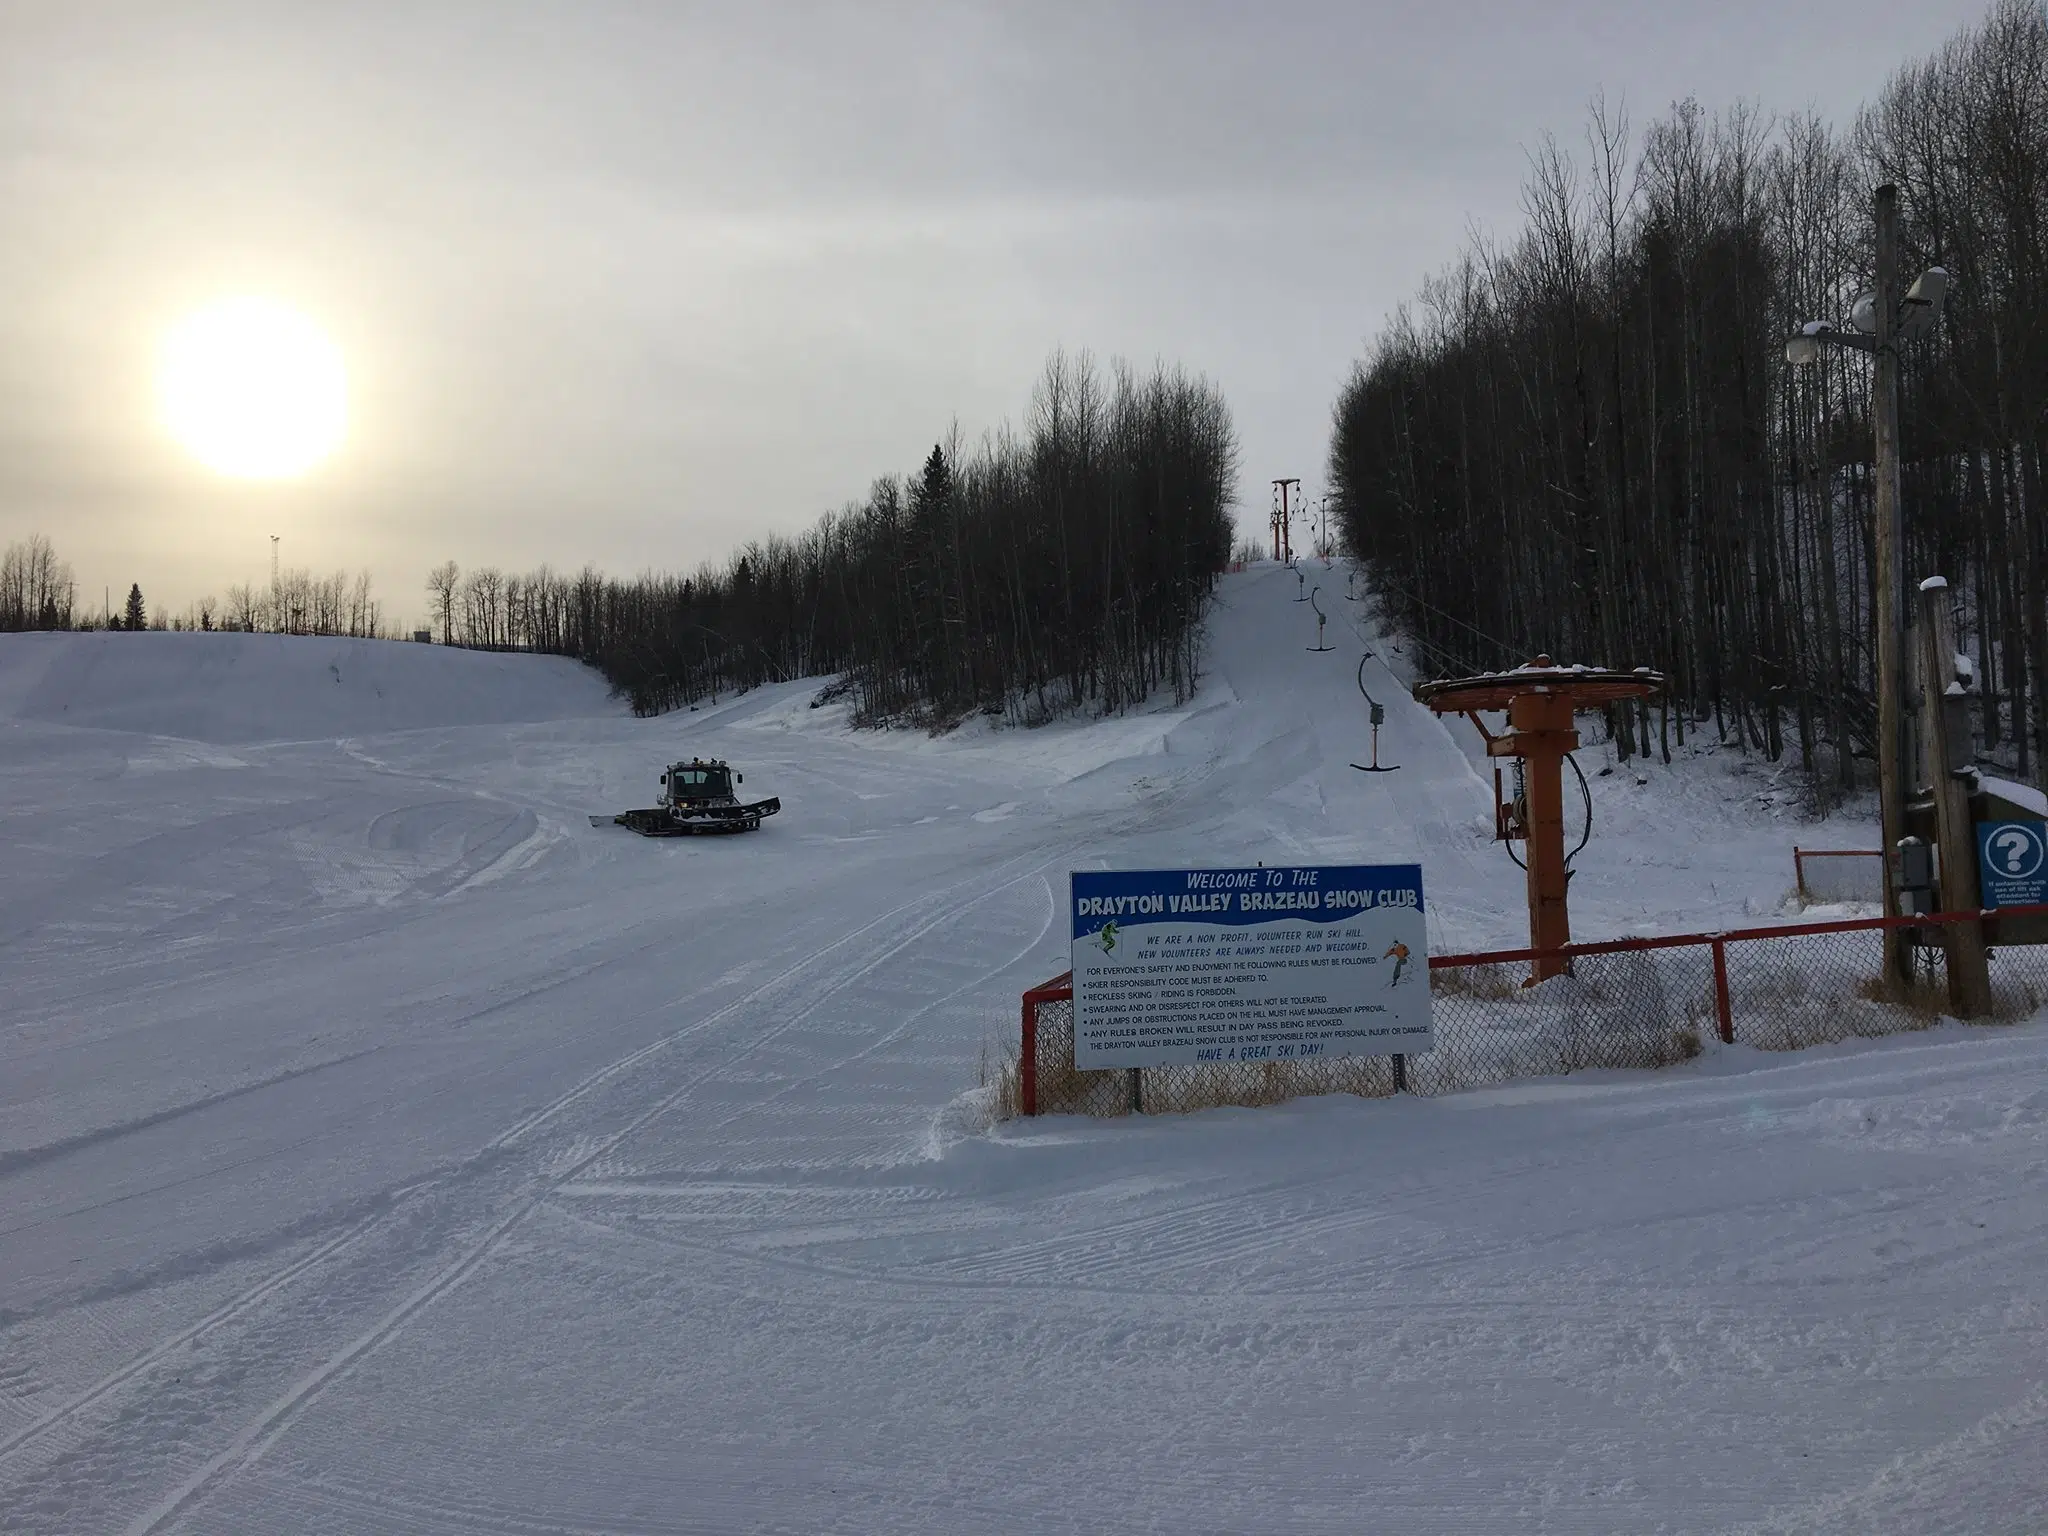 Drayton Valley ski hill opens this weekend for first season since 2015